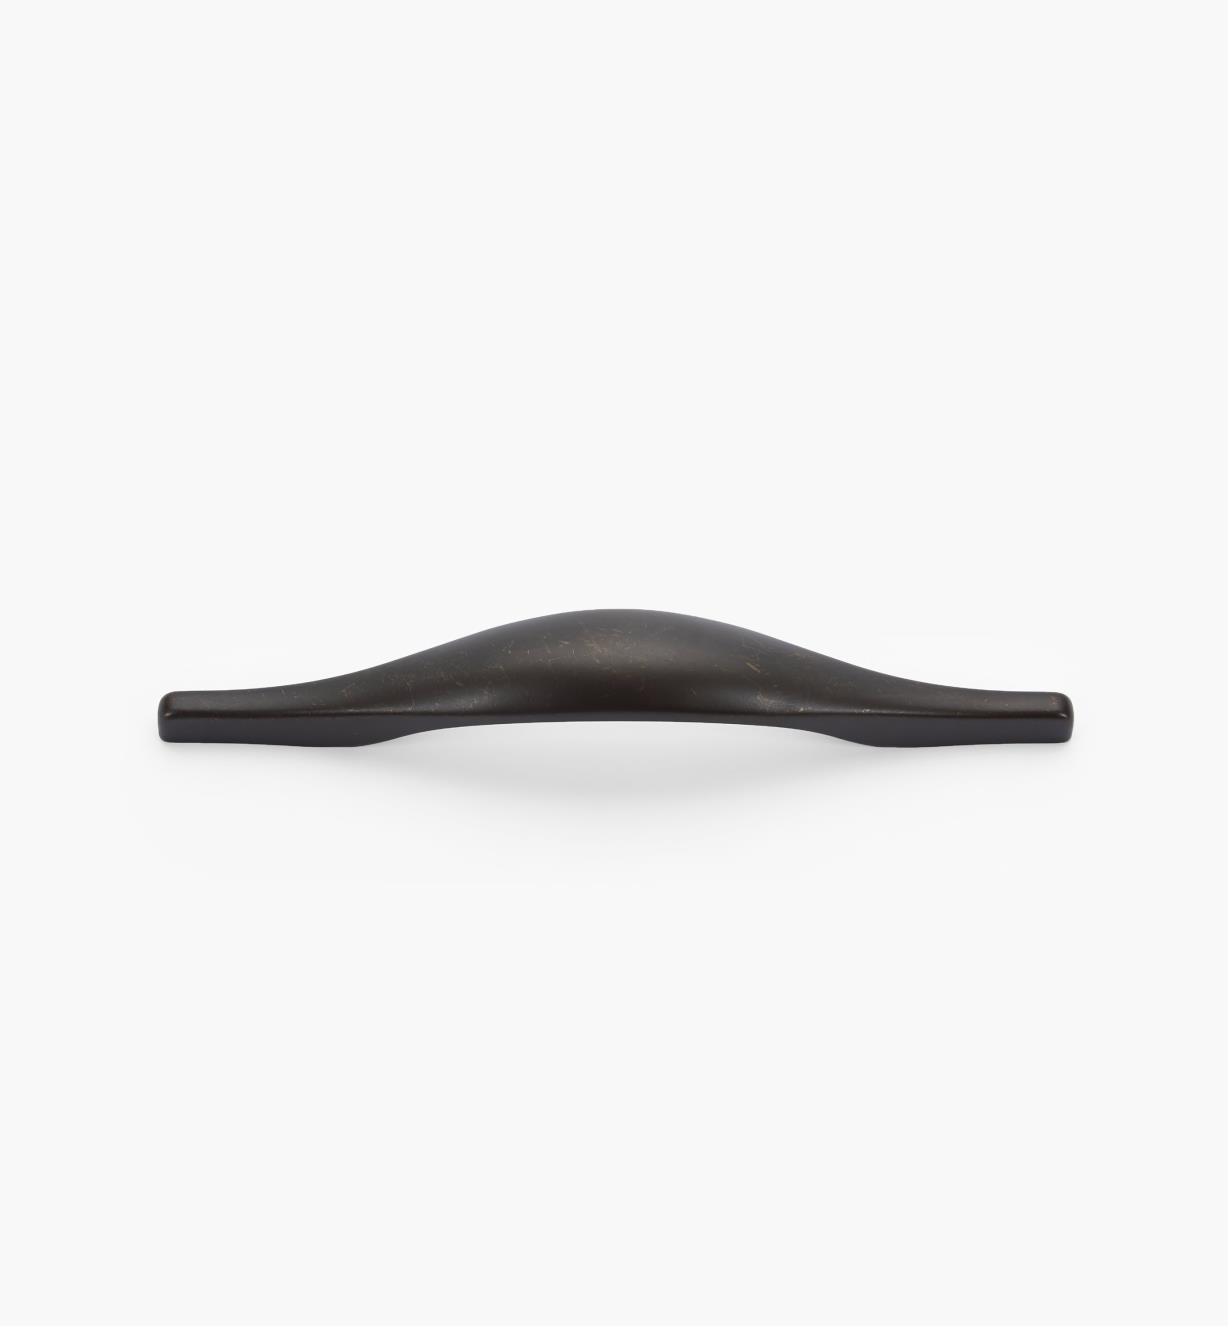 00A7961 - Oil-Rubbed Bronze Contorno Handle, 128mm/160mm centers, each